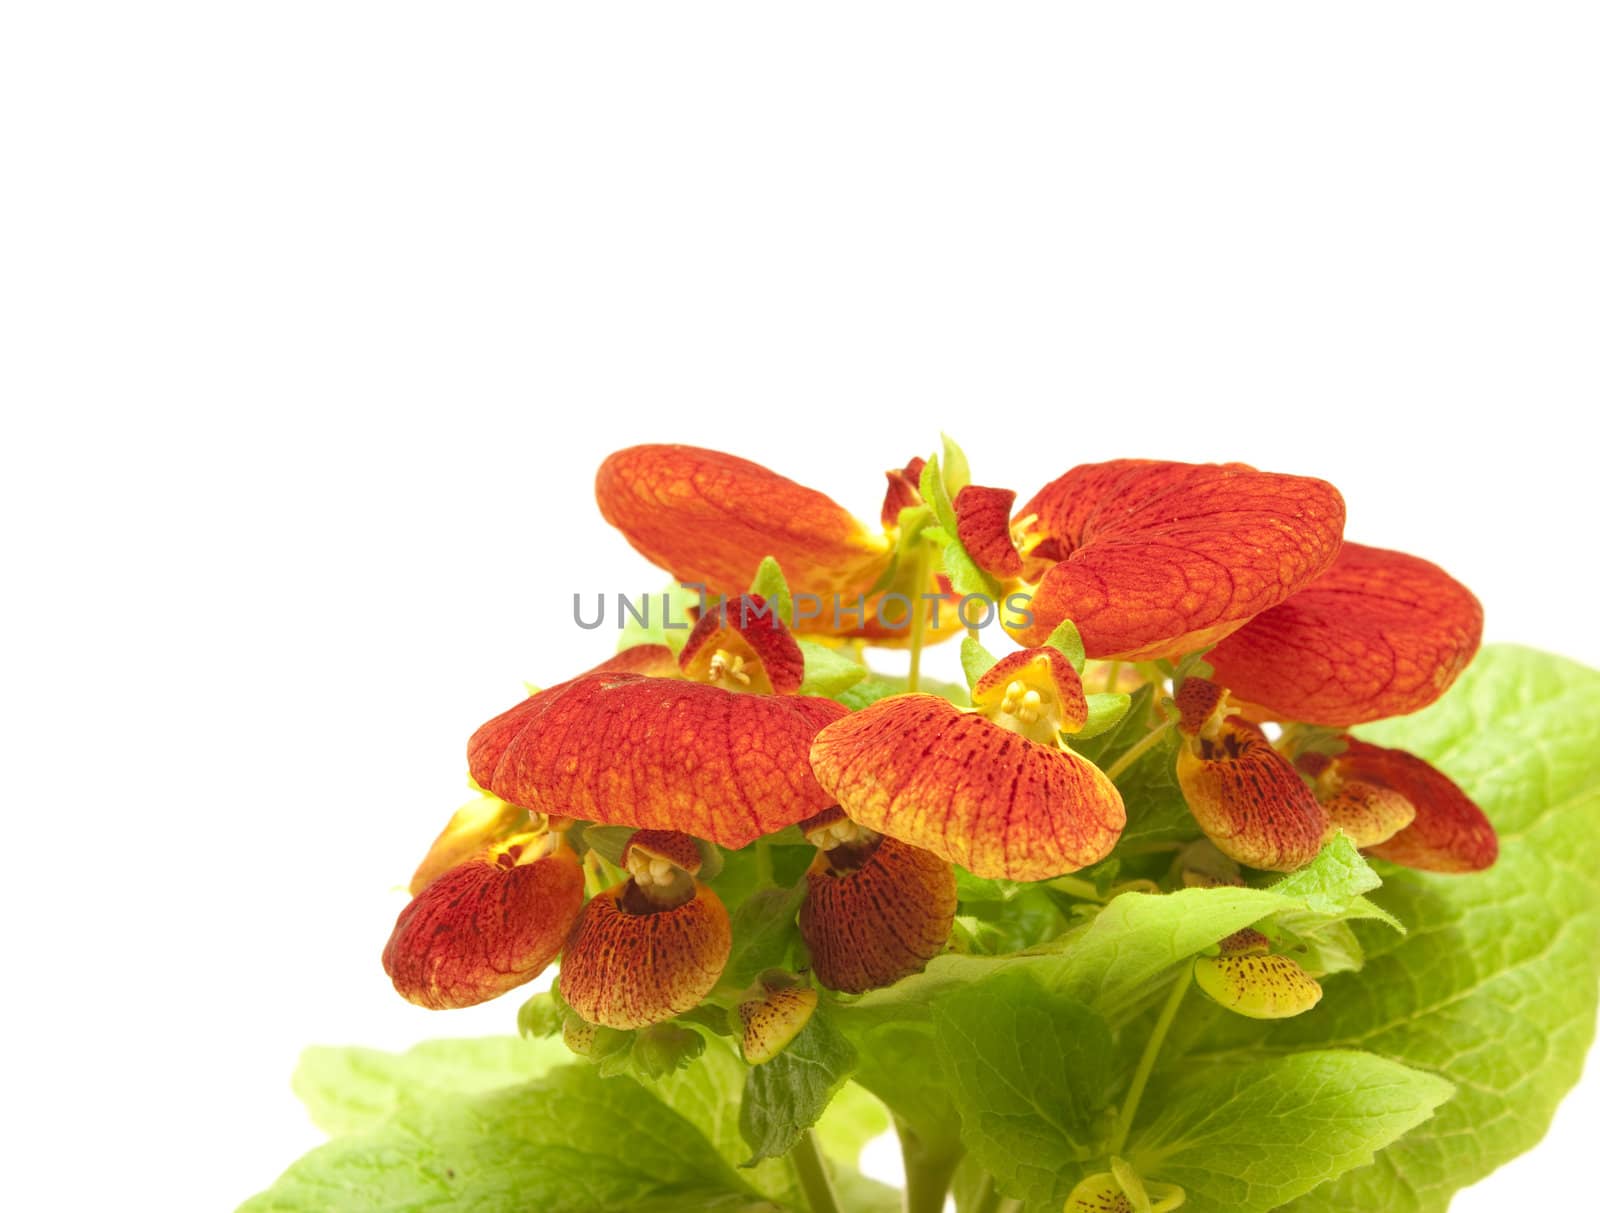 Calceolaria by Arsen